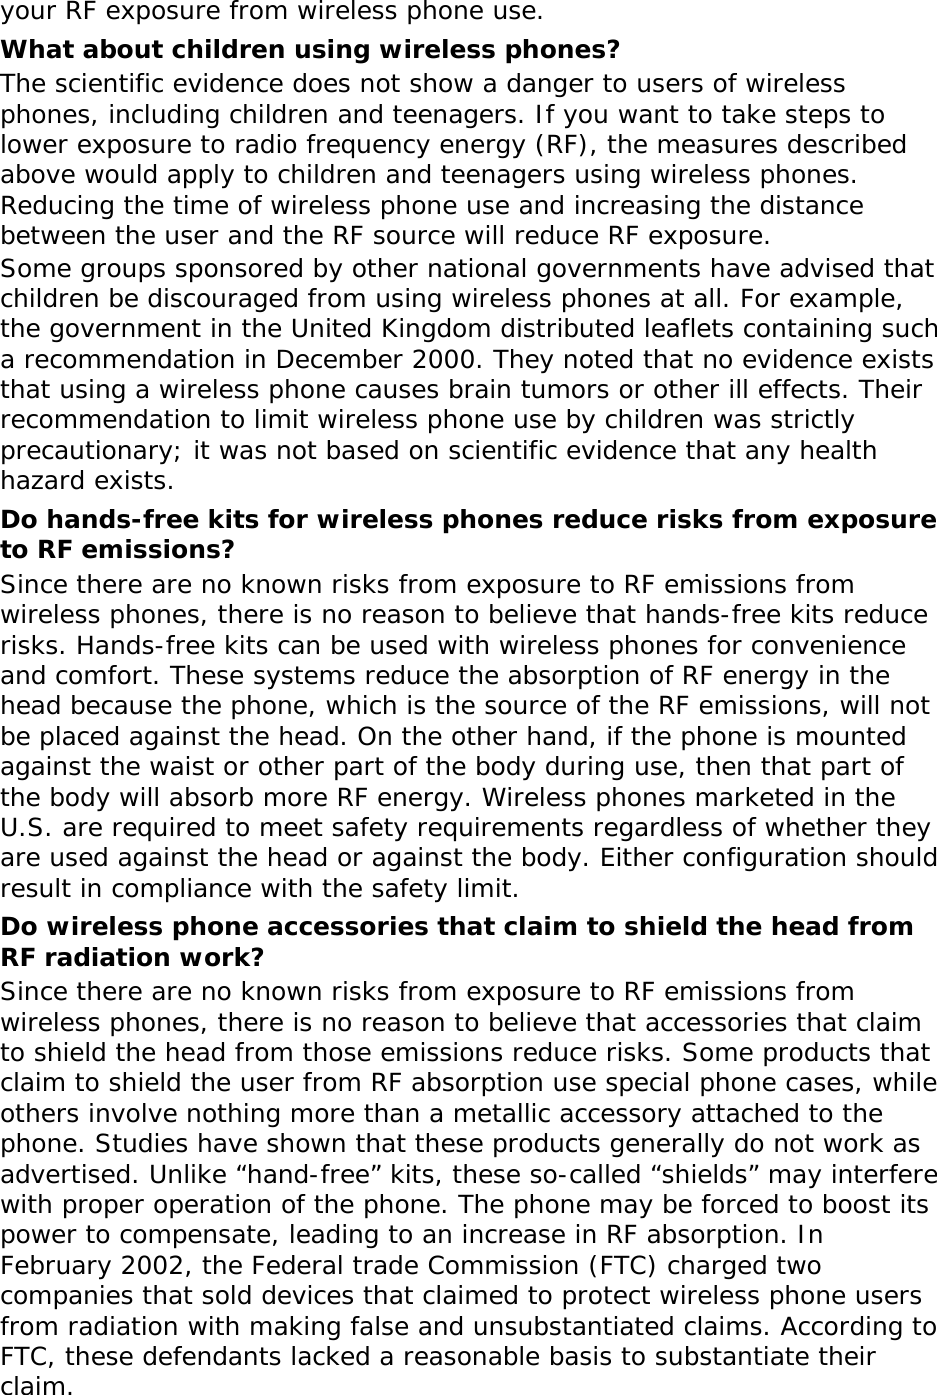 your RF exposure from wireless phone use. What about children using wireless phones? The scientific evidence does not show a danger to users of wireless phones, including children and teenagers. If you want to take steps to lower exposure to radio frequency energy (RF), the measures described above would apply to children and teenagers using wireless phones. Reducing the time of wireless phone use and increasing the distance between the user and the RF source will reduce RF exposure. Some groups sponsored by other national governments have advised that children be discouraged from using wireless phones at all. For example, the government in the United Kingdom distributed leaflets containing such a recommendation in December 2000. They noted that no evidence exists that using a wireless phone causes brain tumors or other ill effects. Their recommendation to limit wireless phone use by children was strictly precautionary; it was not based on scientific evidence that any health hazard exists.  Do hands-free kits for wireless phones reduce risks from exposure to RF emissions? Since there are no known risks from exposure to RF emissions from wireless phones, there is no reason to believe that hands-free kits reduce risks. Hands-free kits can be used with wireless phones for convenience and comfort. These systems reduce the absorption of RF energy in the head because the phone, which is the source of the RF emissions, will not be placed against the head. On the other hand, if the phone is mounted against the waist or other part of the body during use, then that part of the body will absorb more RF energy. Wireless phones marketed in the U.S. are required to meet safety requirements regardless of whether they are used against the head or against the body. Either configuration should result in compliance with the safety limit. Do wireless phone accessories that claim to shield the head from RF radiation work? Since there are no known risks from exposure to RF emissions from wireless phones, there is no reason to believe that accessories that claim to shield the head from those emissions reduce risks. Some products that claim to shield the user from RF absorption use special phone cases, while others involve nothing more than a metallic accessory attached to the phone. Studies have shown that these products generally do not work as advertised. Unlike “hand-free” kits, these so-called “shields” may interfere with proper operation of the phone. The phone may be forced to boost its power to compensate, leading to an increase in RF absorption. In February 2002, the Federal trade Commission (FTC) charged two companies that sold devices that claimed to protect wireless phone users from radiation with making false and unsubstantiated claims. According to FTC, these defendants lacked a reasonable basis to substantiate their claim. 